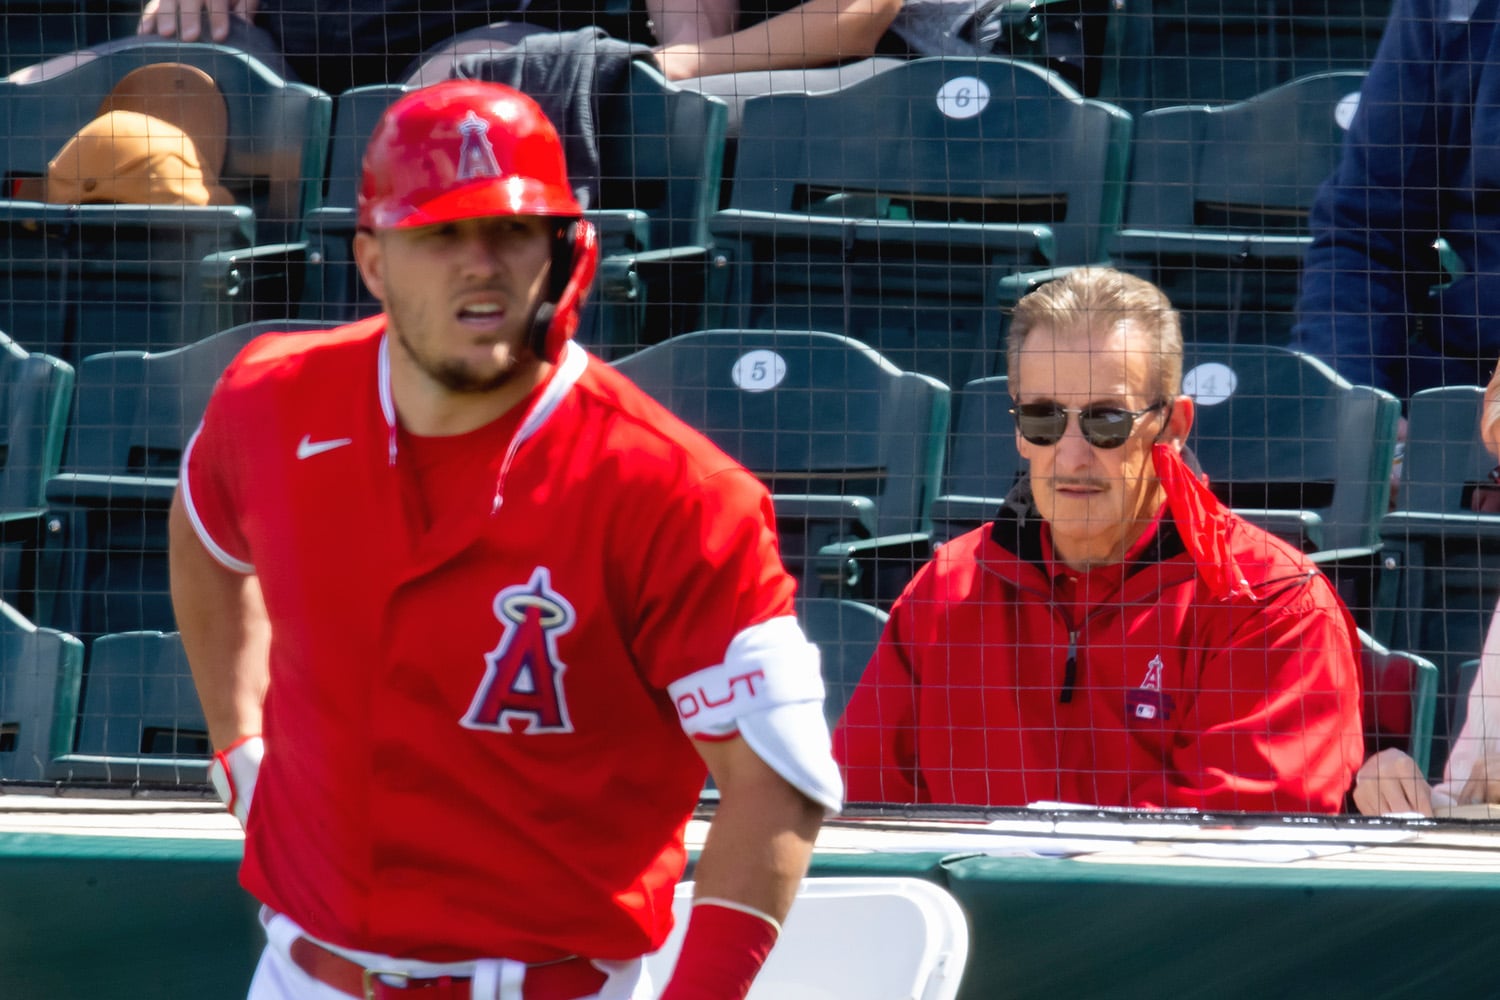 Los Angeles Angels owner Arte Moreno (right) and outfielder Mike Trout